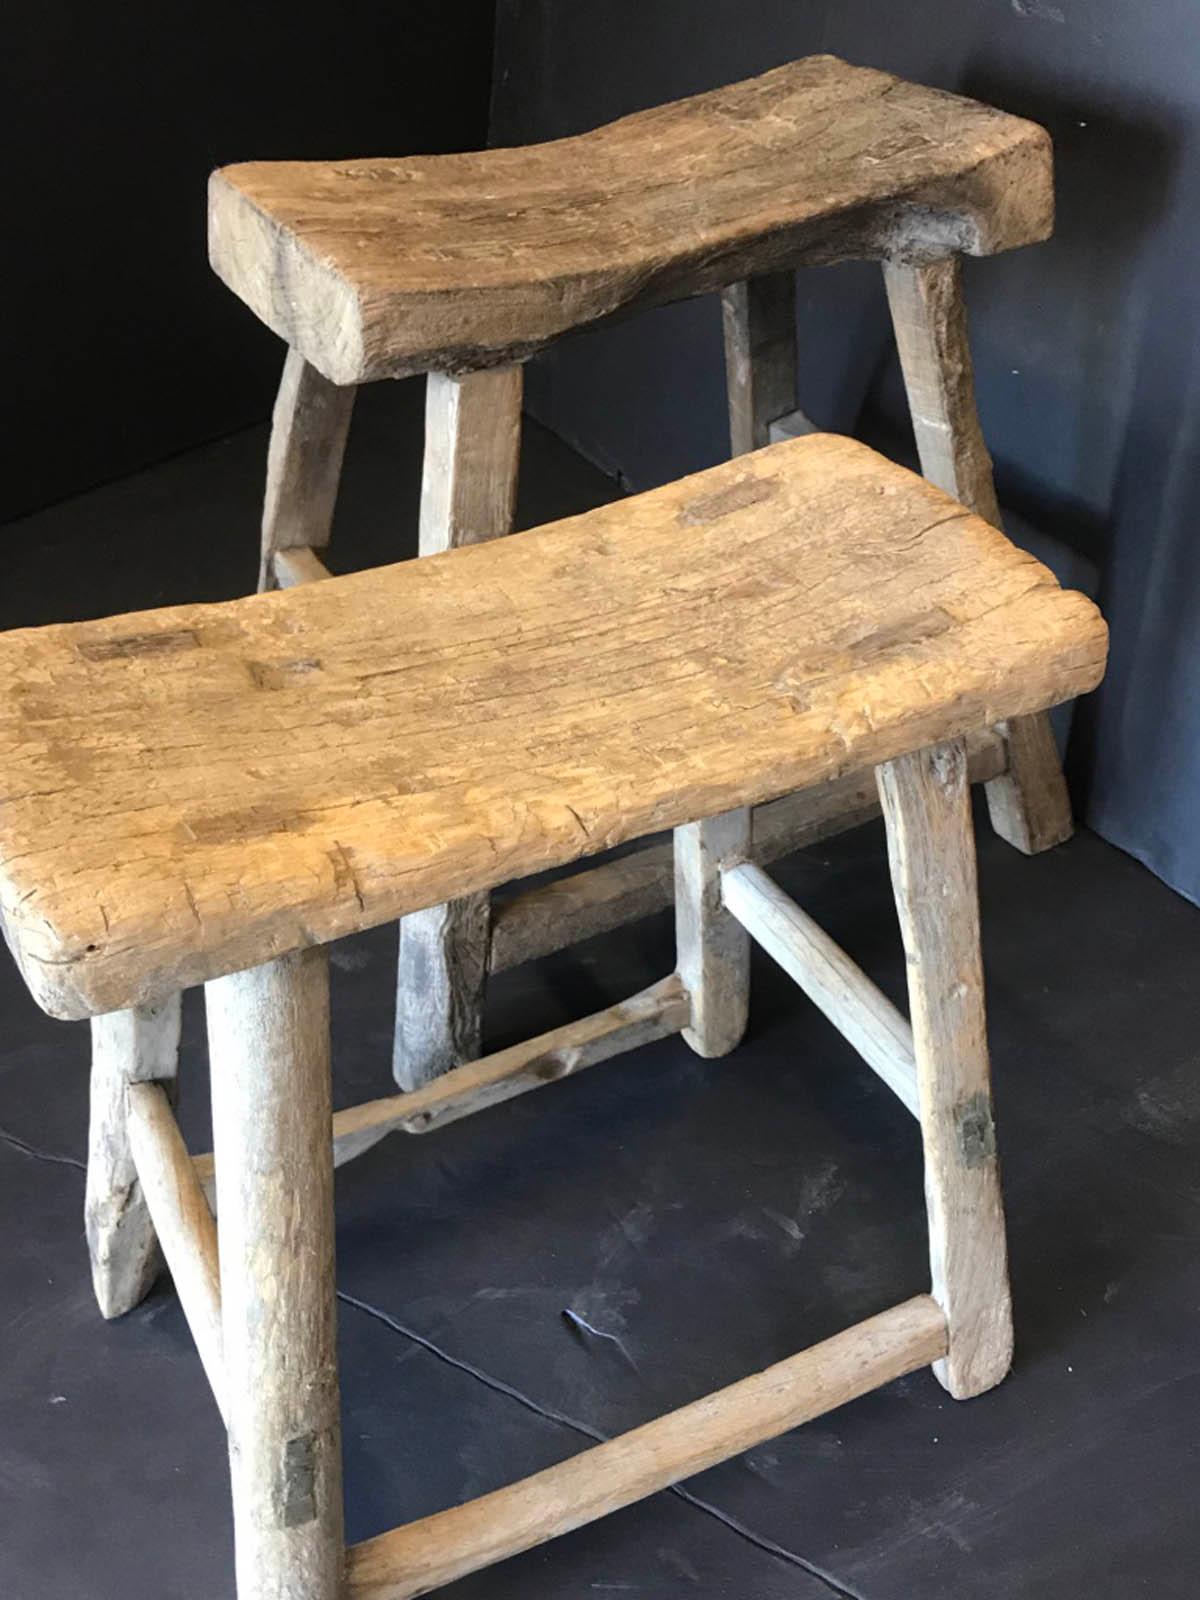 Two Primitive elm wood stools, sold separately. Mortise and tenon construction. The left in the back with darker patina has overall dimensions of 23 x 15 x 20.5 inches and the seat is 18.5 x 9.5 and about three inches thick. The right one is 17.5 x